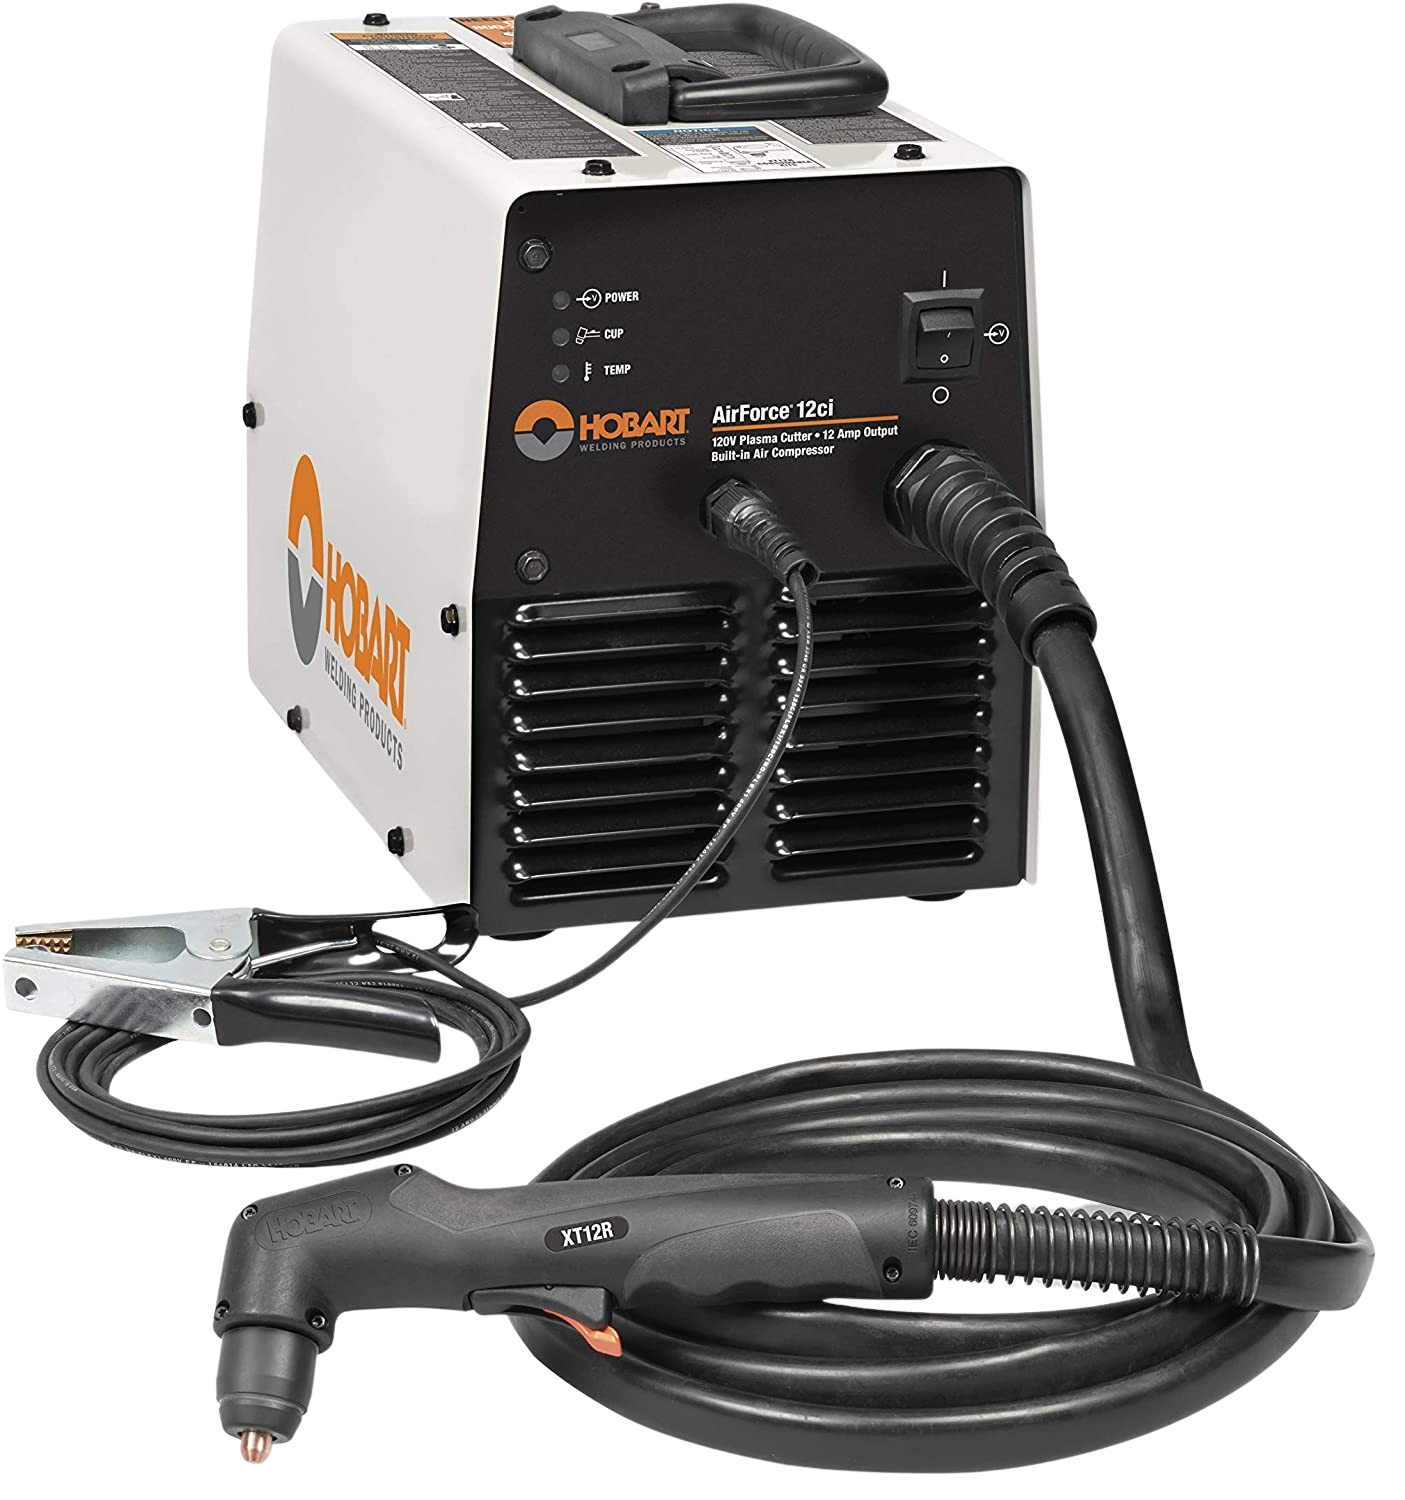 Hobart 500564 Airforce 12ci Plasma Cutter with Built-In Air Compressor 120V New